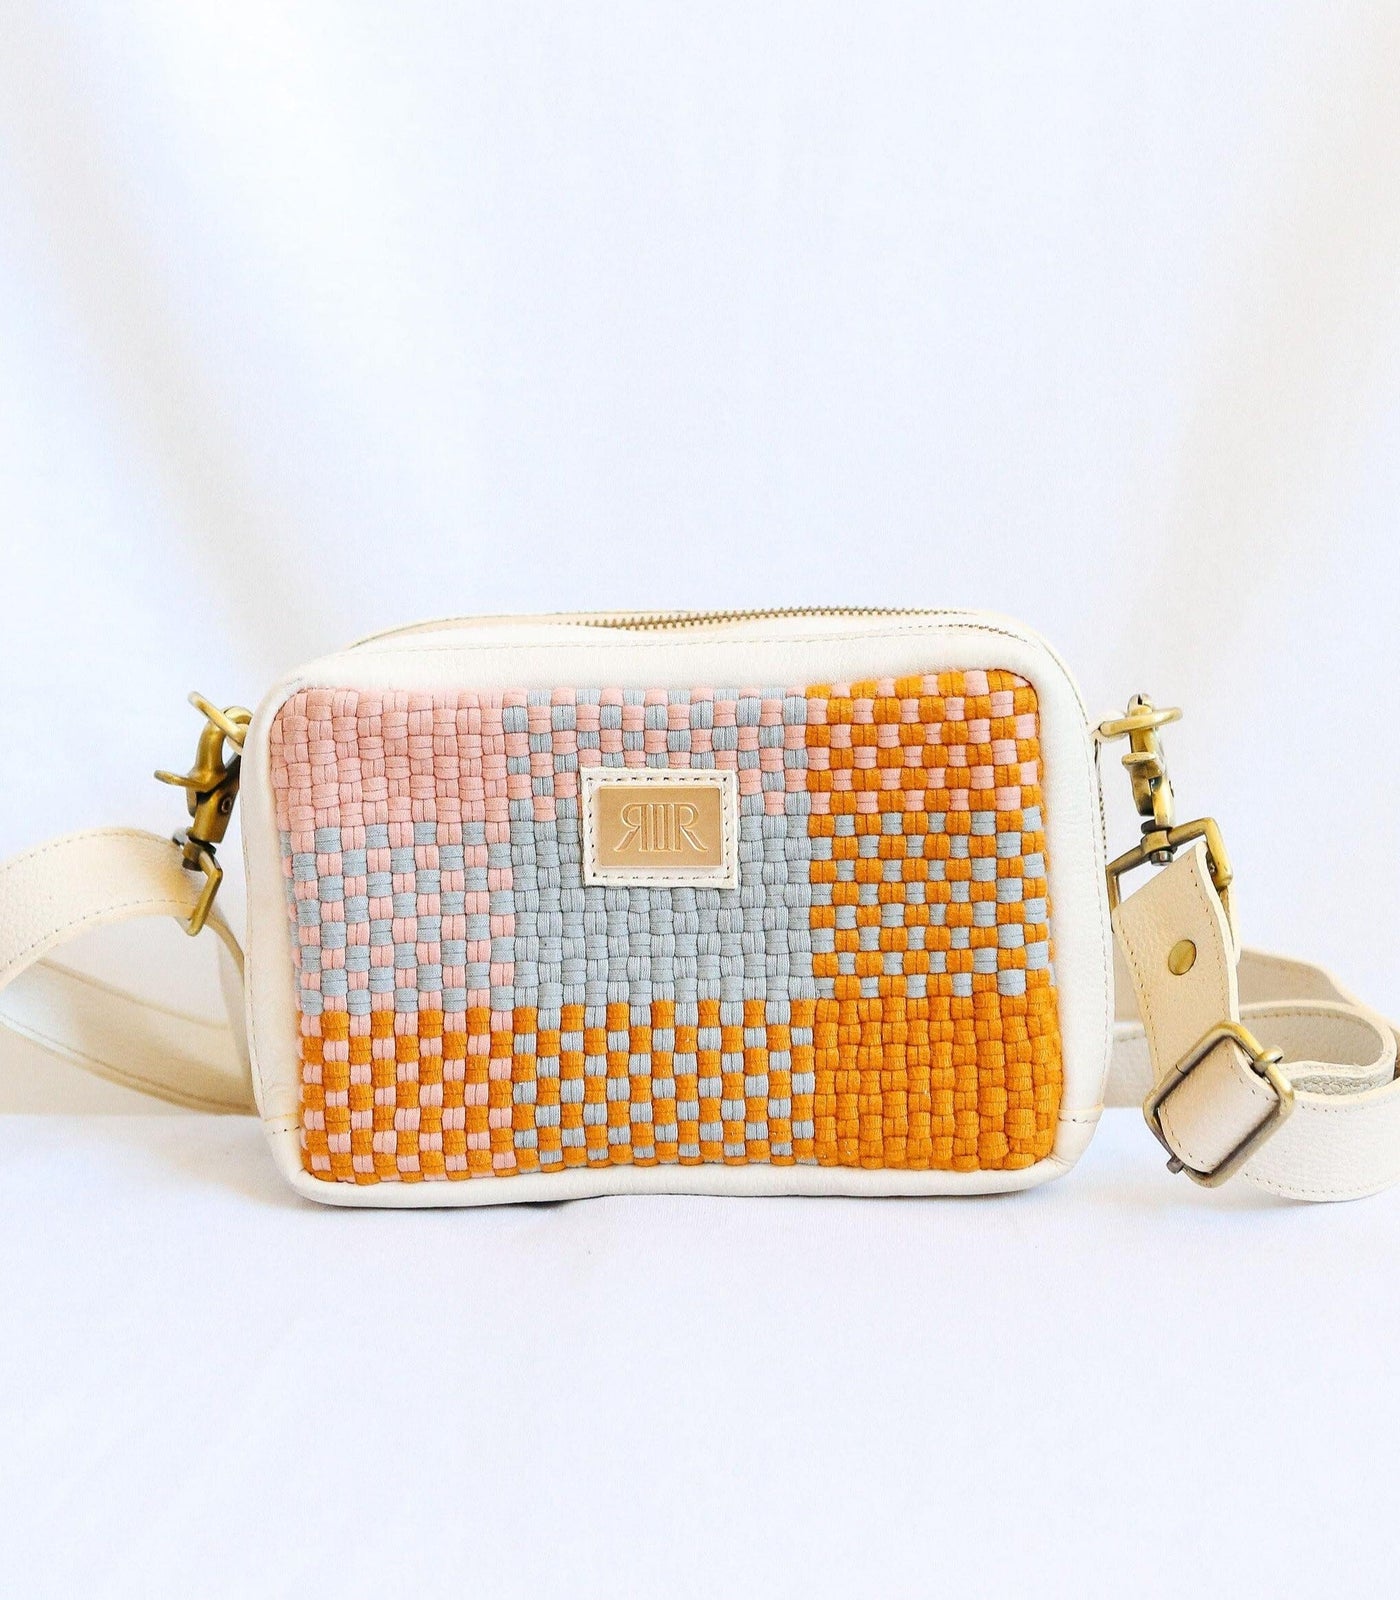 Bento Bag in Beige - Rags2Riches